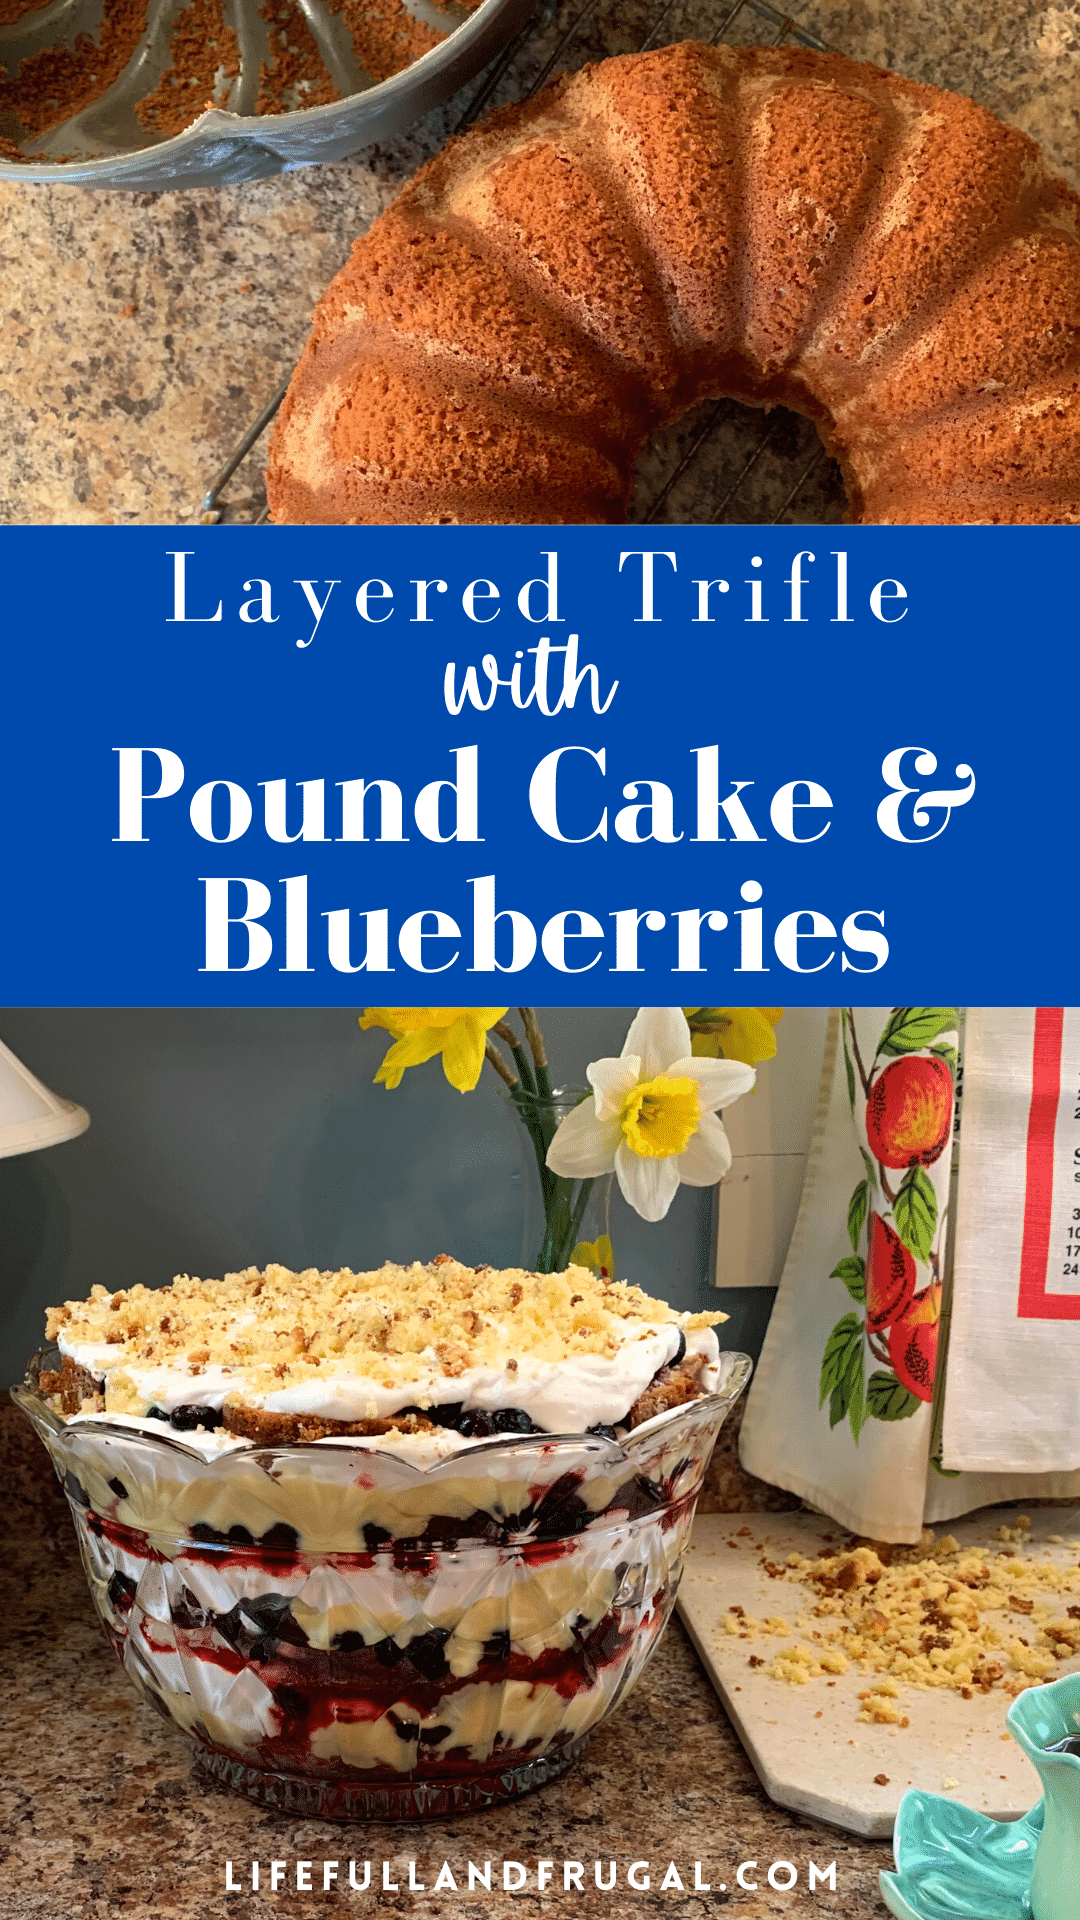 Layered Trifle with Pound Cake and Blueberries pin life full and frugal